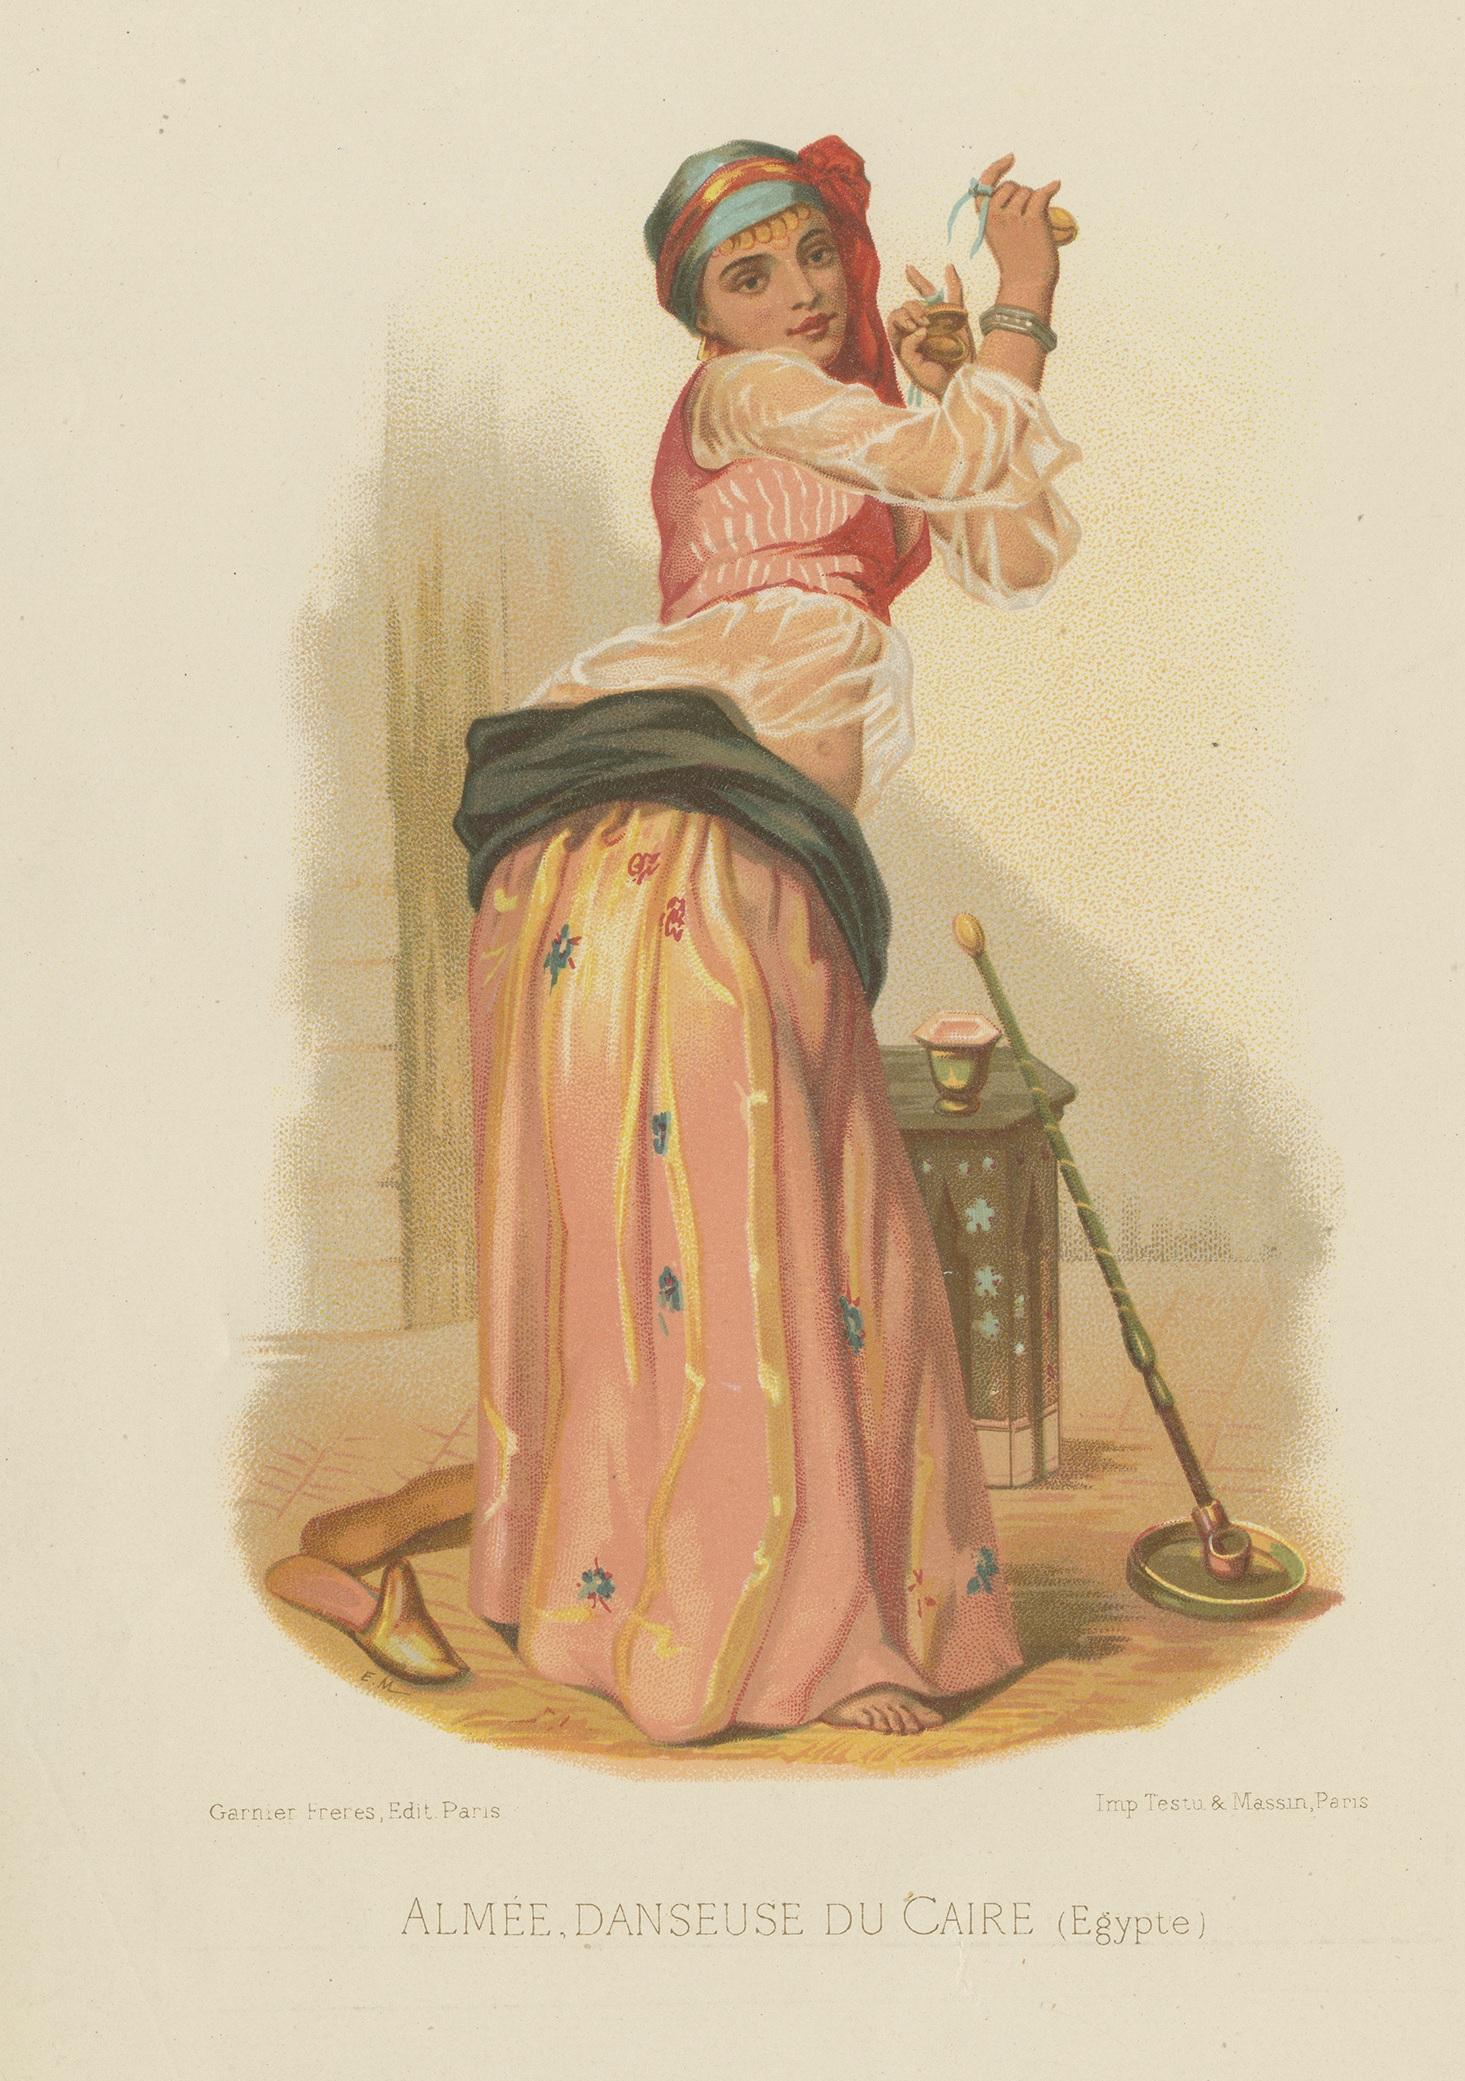 Antique print titled 'Almée, Danseuse du Caire (Egypte)'. Very decorative print of a belly dancer from Cairo, Egypt. This print originates from 'Geographie Generale (..) by Louis Gregoire.